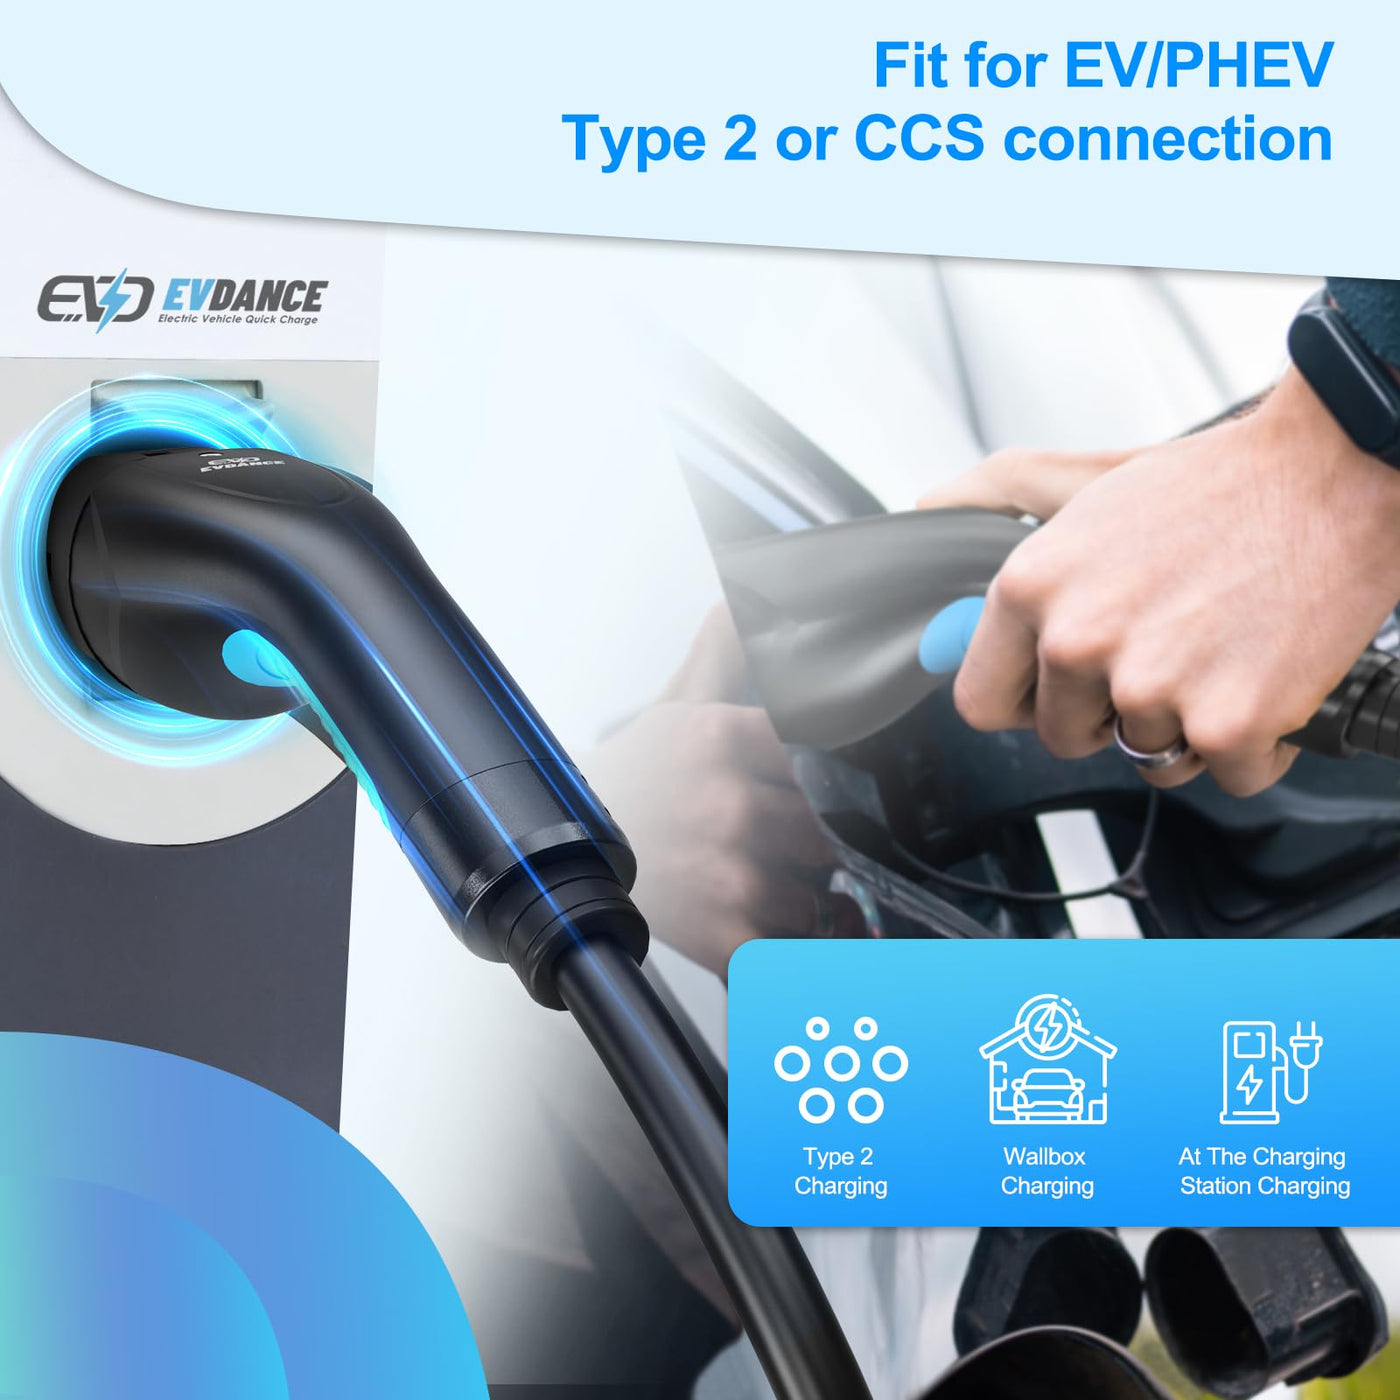 EVDANCE Type 2 to Type 2 EV Charging Extension Cable 1 Phase 